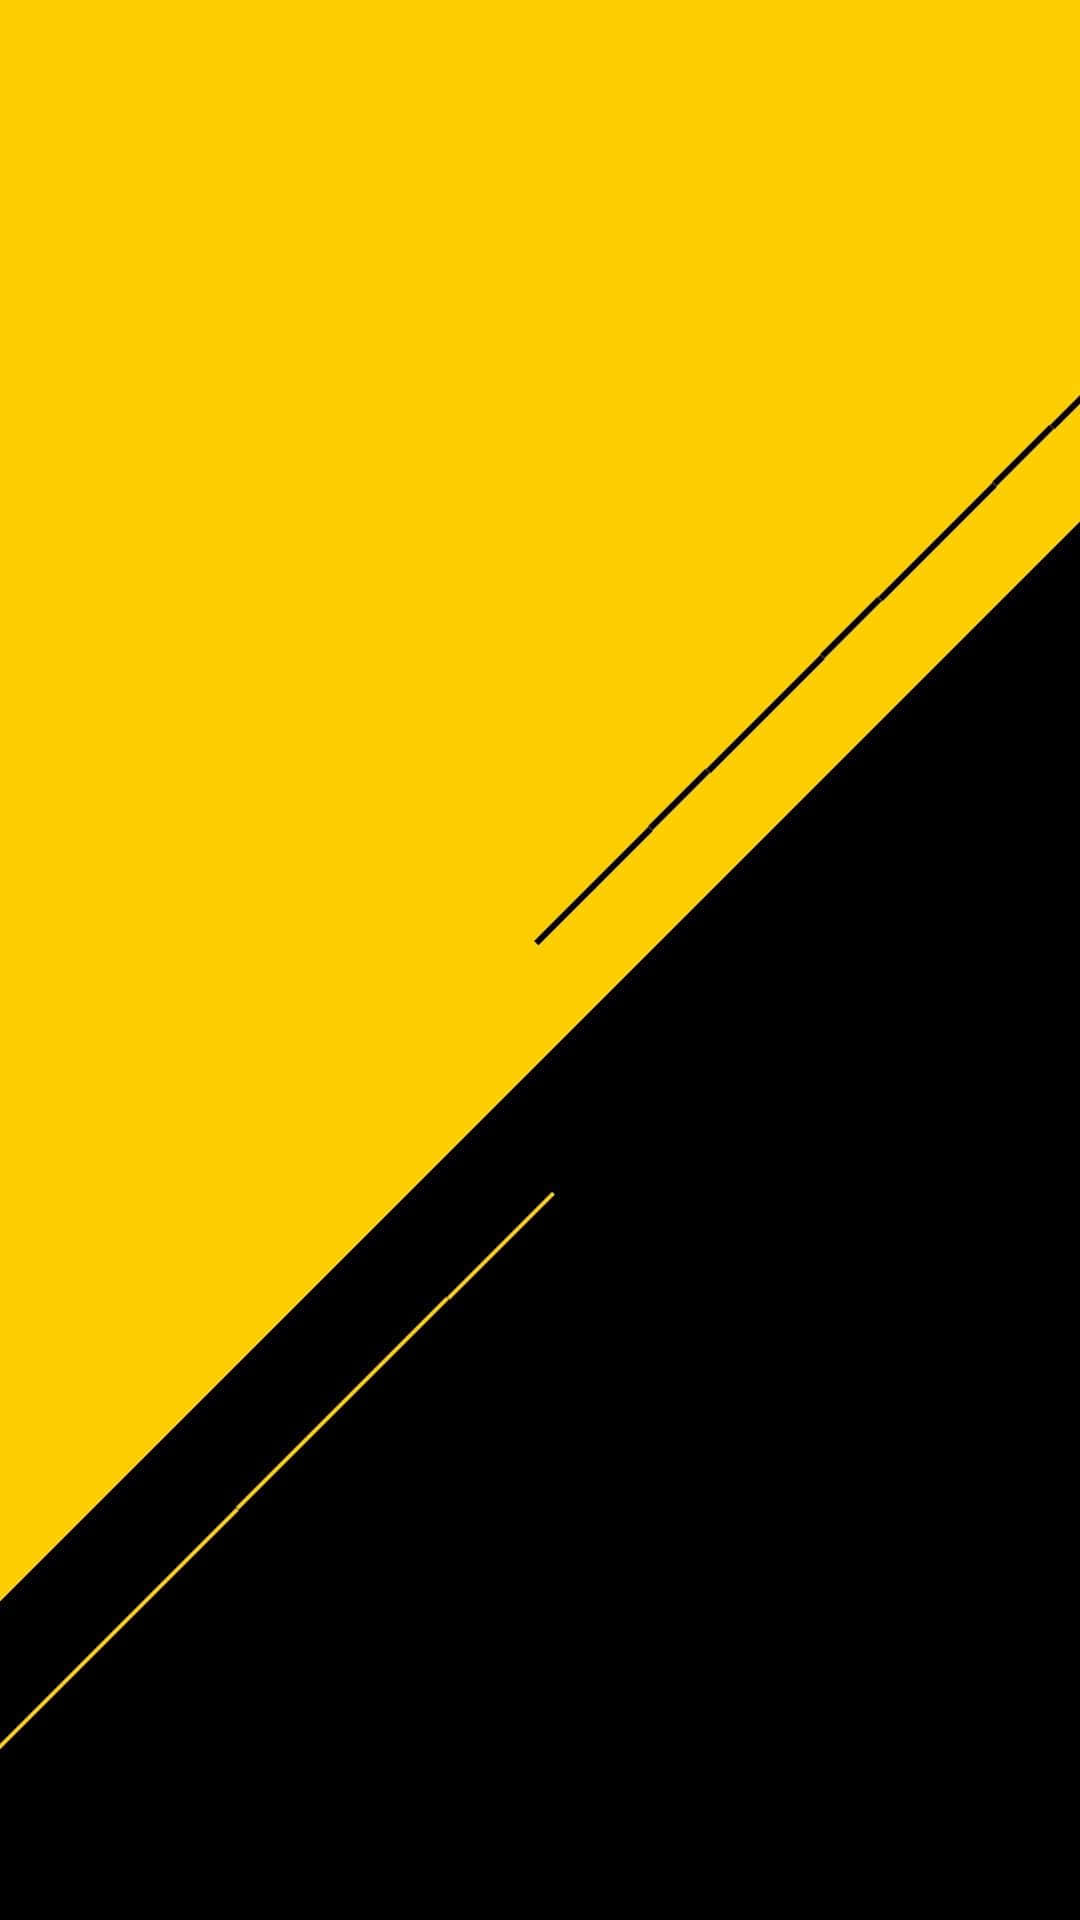 Vibrant Yellow and Black Contrasting Background